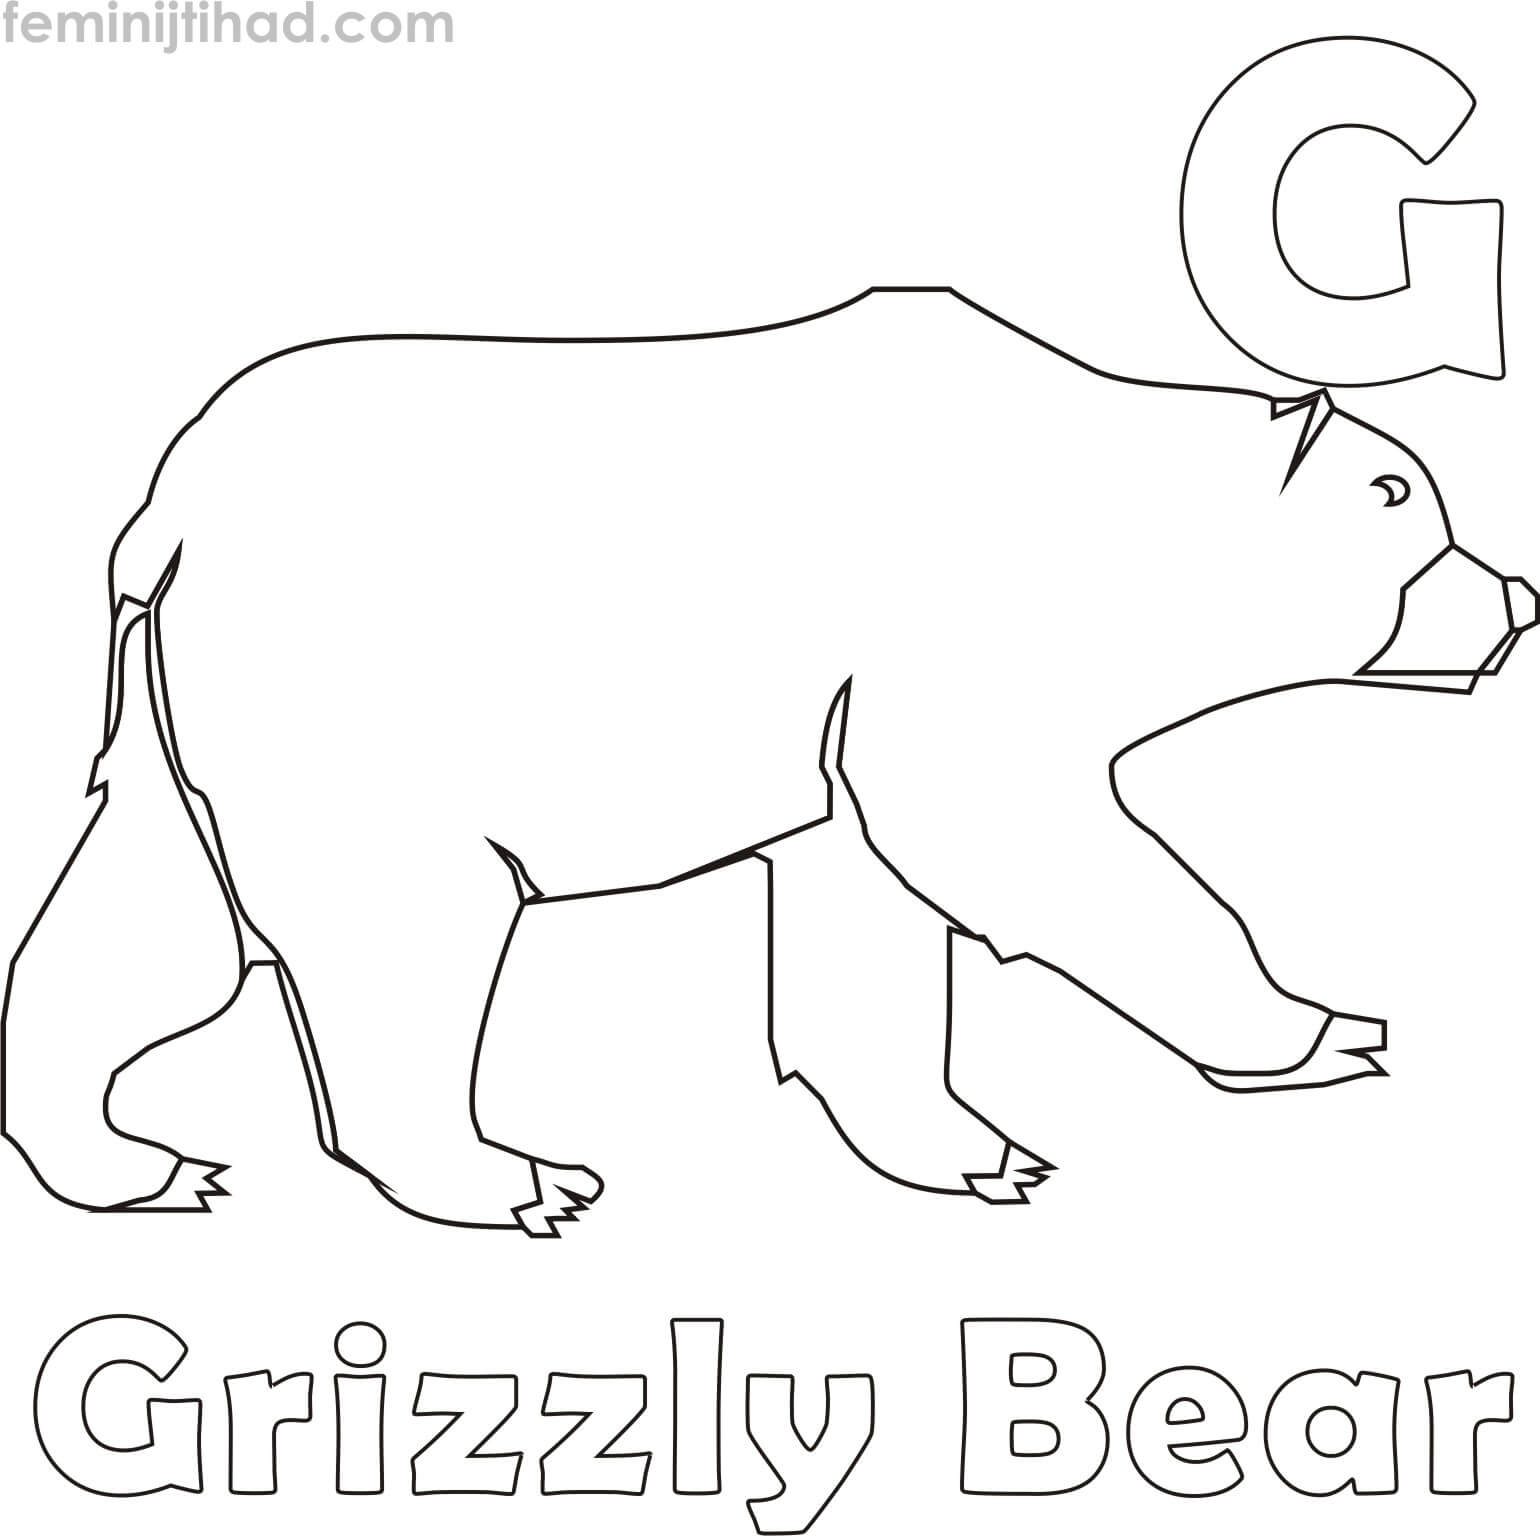 coloring page of a grizzly bear